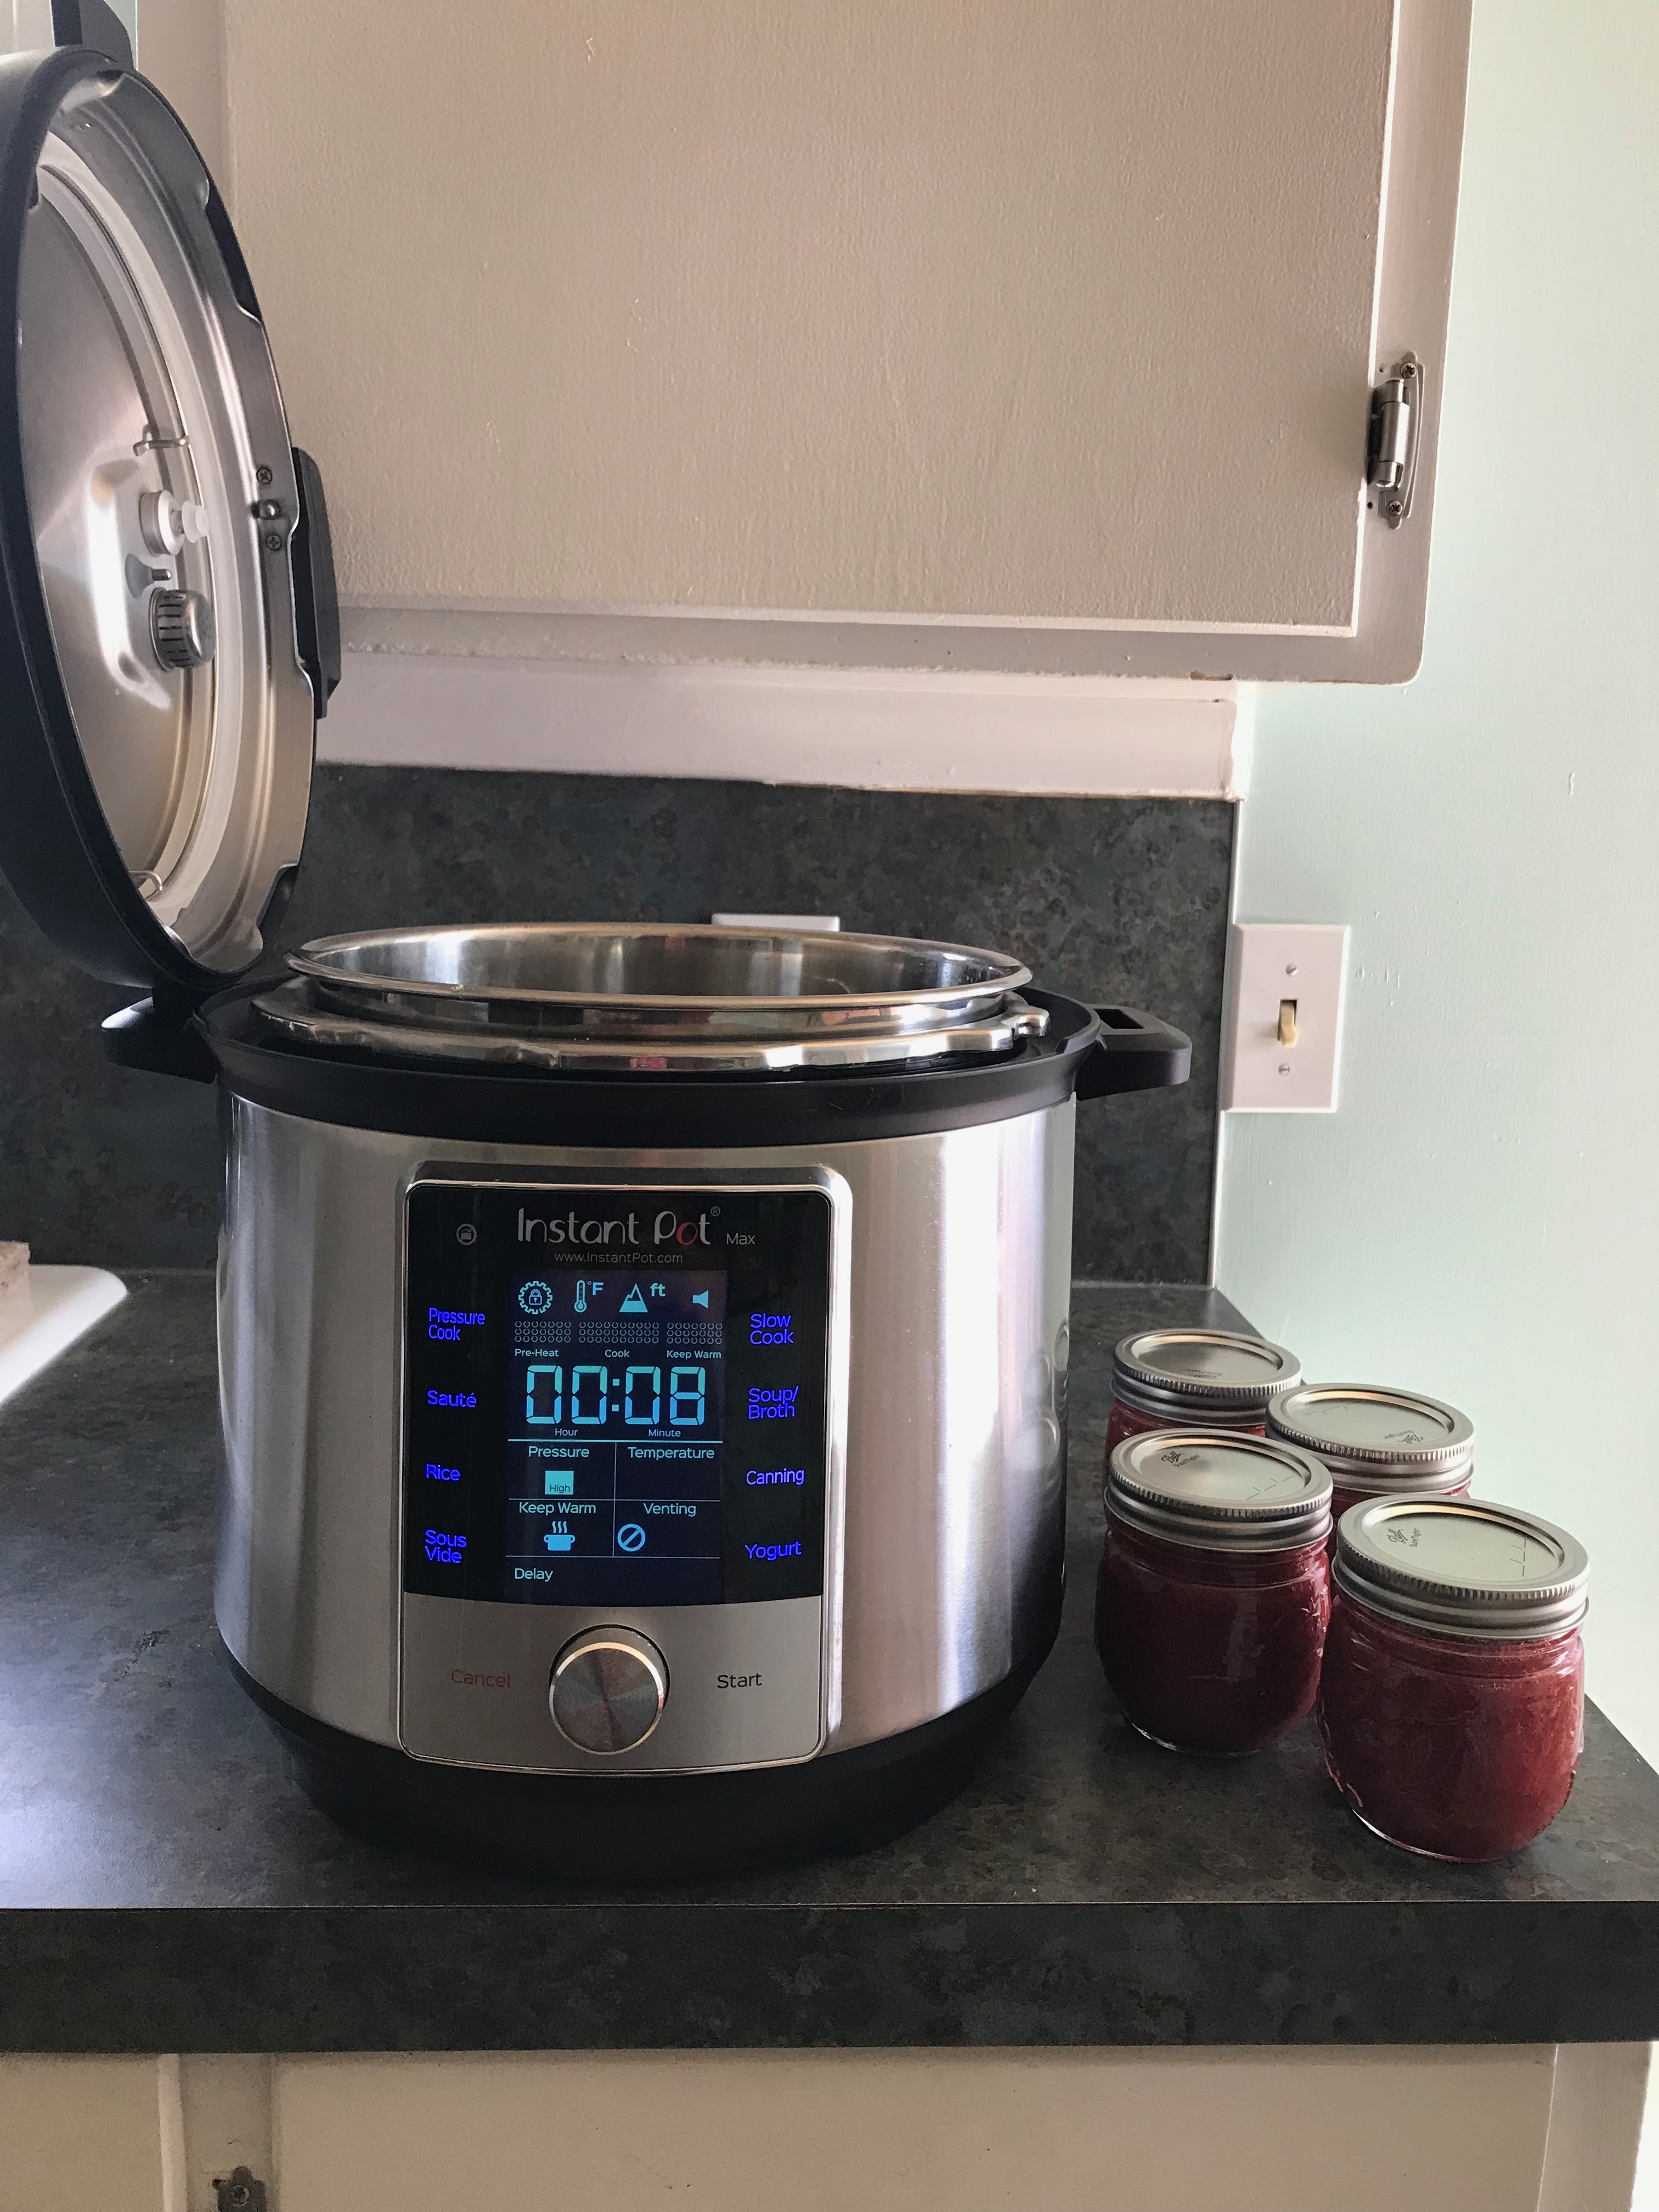 Instant Pot Max Review (2018): How the New Instant Pot Compares to the  Ultra and Duo